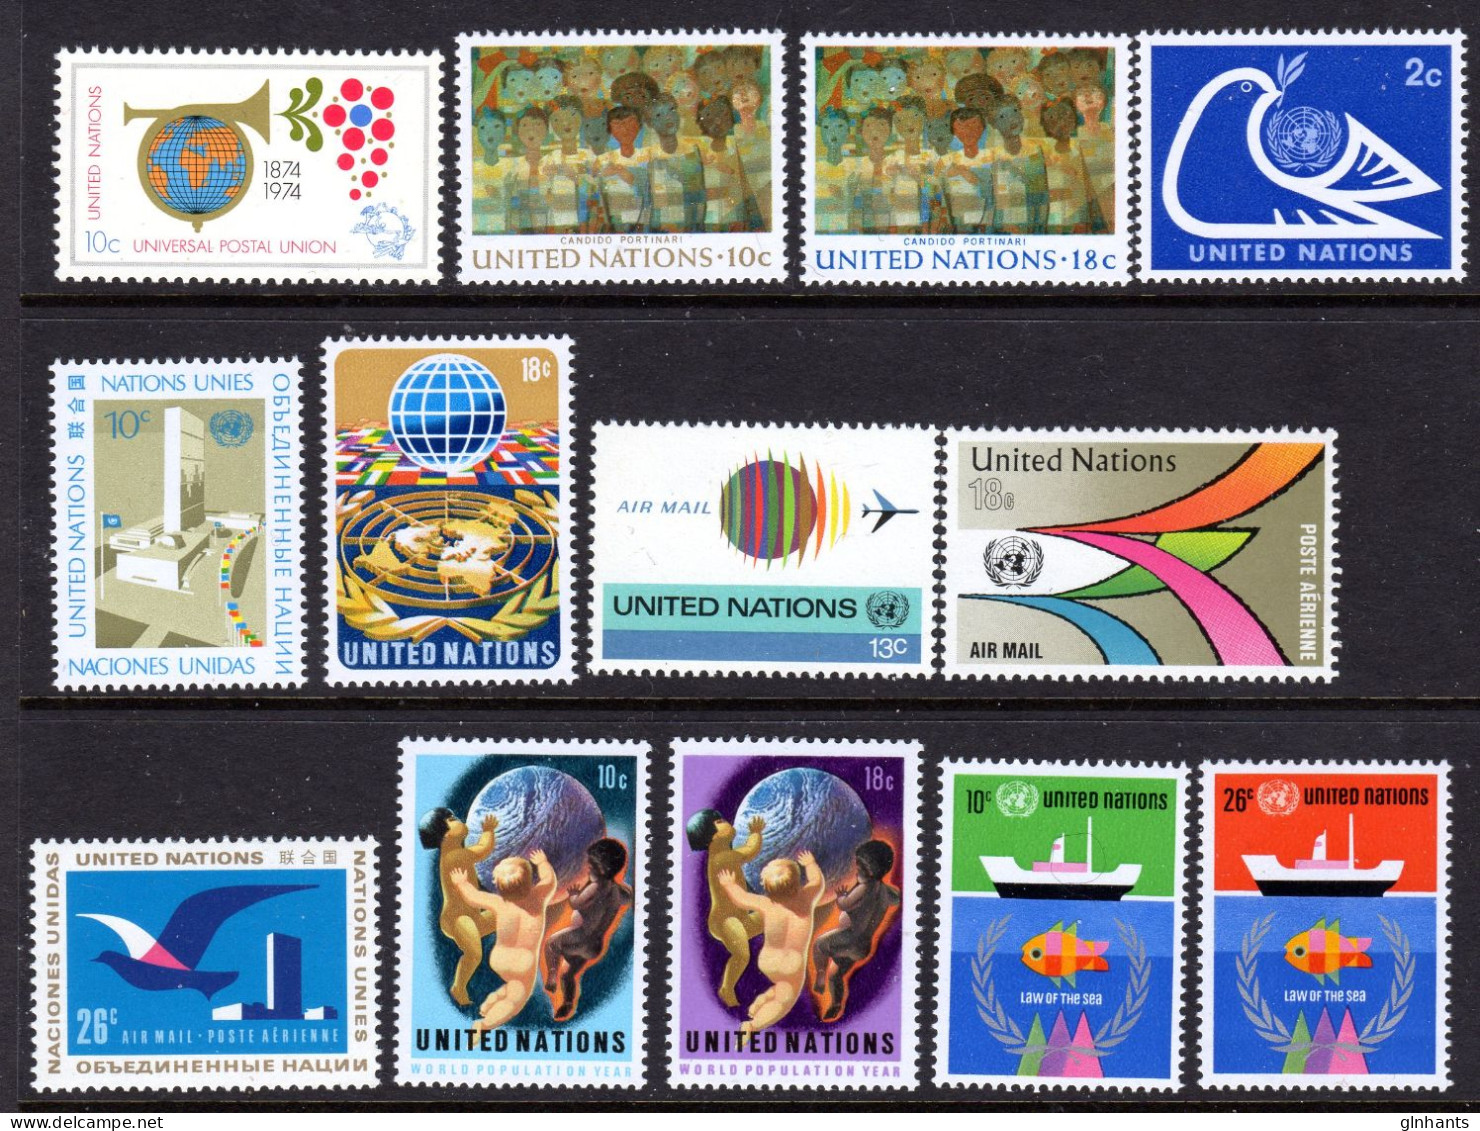 UNITED NATIONS UN NEW YORK - 1974 COMPLETE YEAR SET (13V) AS PICTURED FINE MNH ** SG 250-262 - Ungebraucht